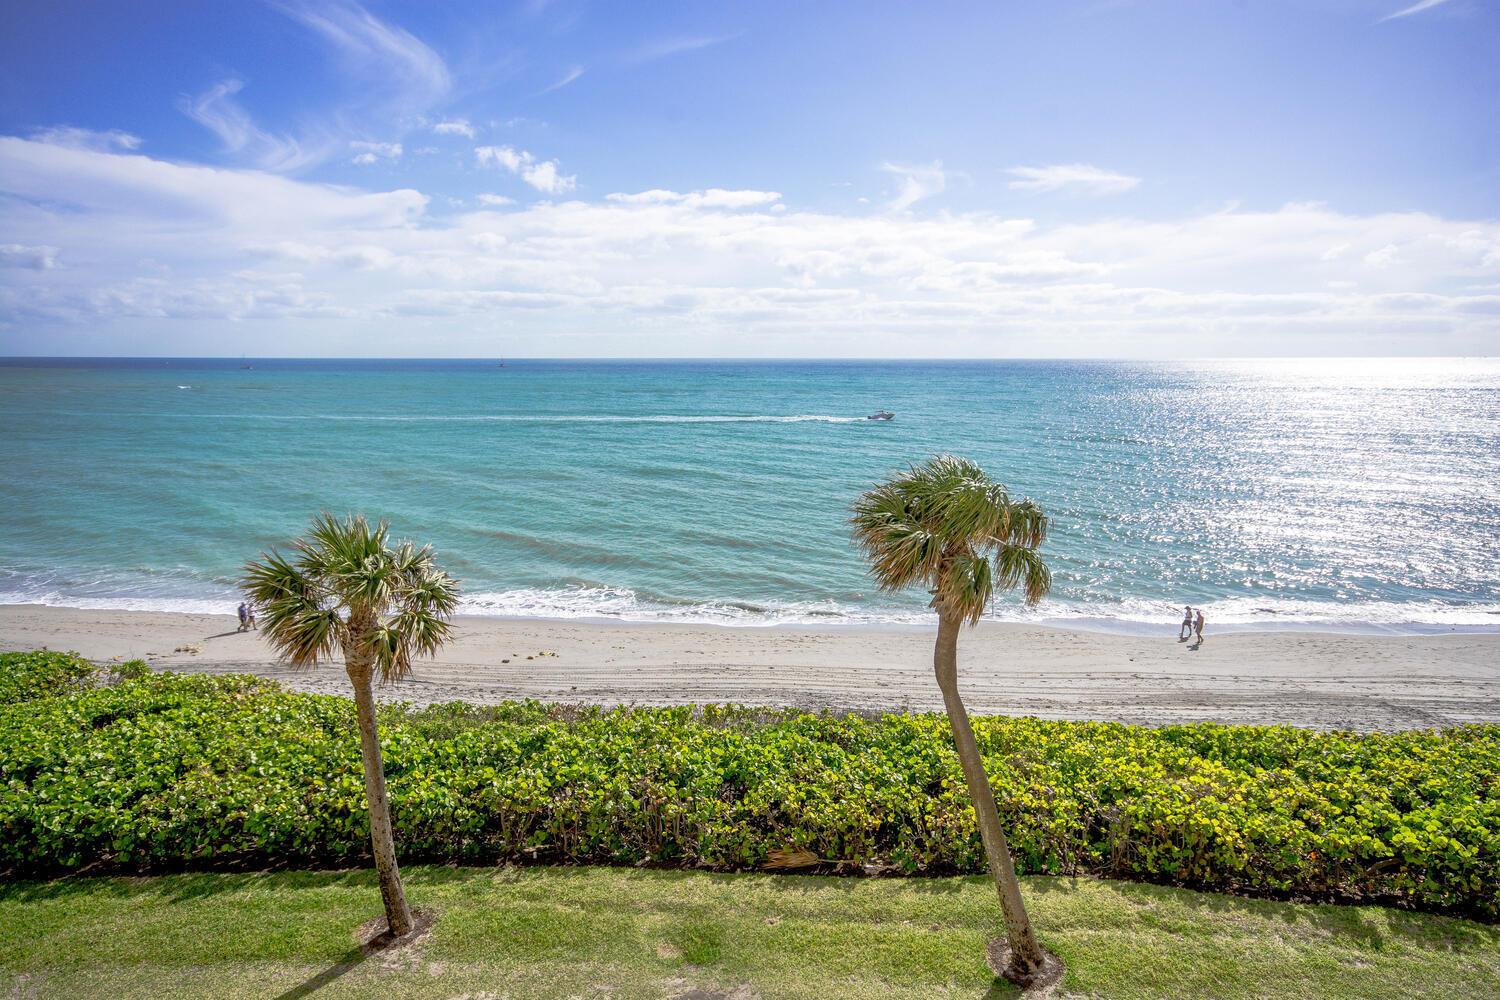 Highly sought after corner unit which  provides panoramic ocean views throughout the condo. Ocean Trail is situated on 22 acres providing walking trails, 9 tennis courts, community pool as well as a recently  constructed new pool for the 200 bldg.Residents are offered fitness center, community room. The pool deck leads to the ocean / beach through a private gate.